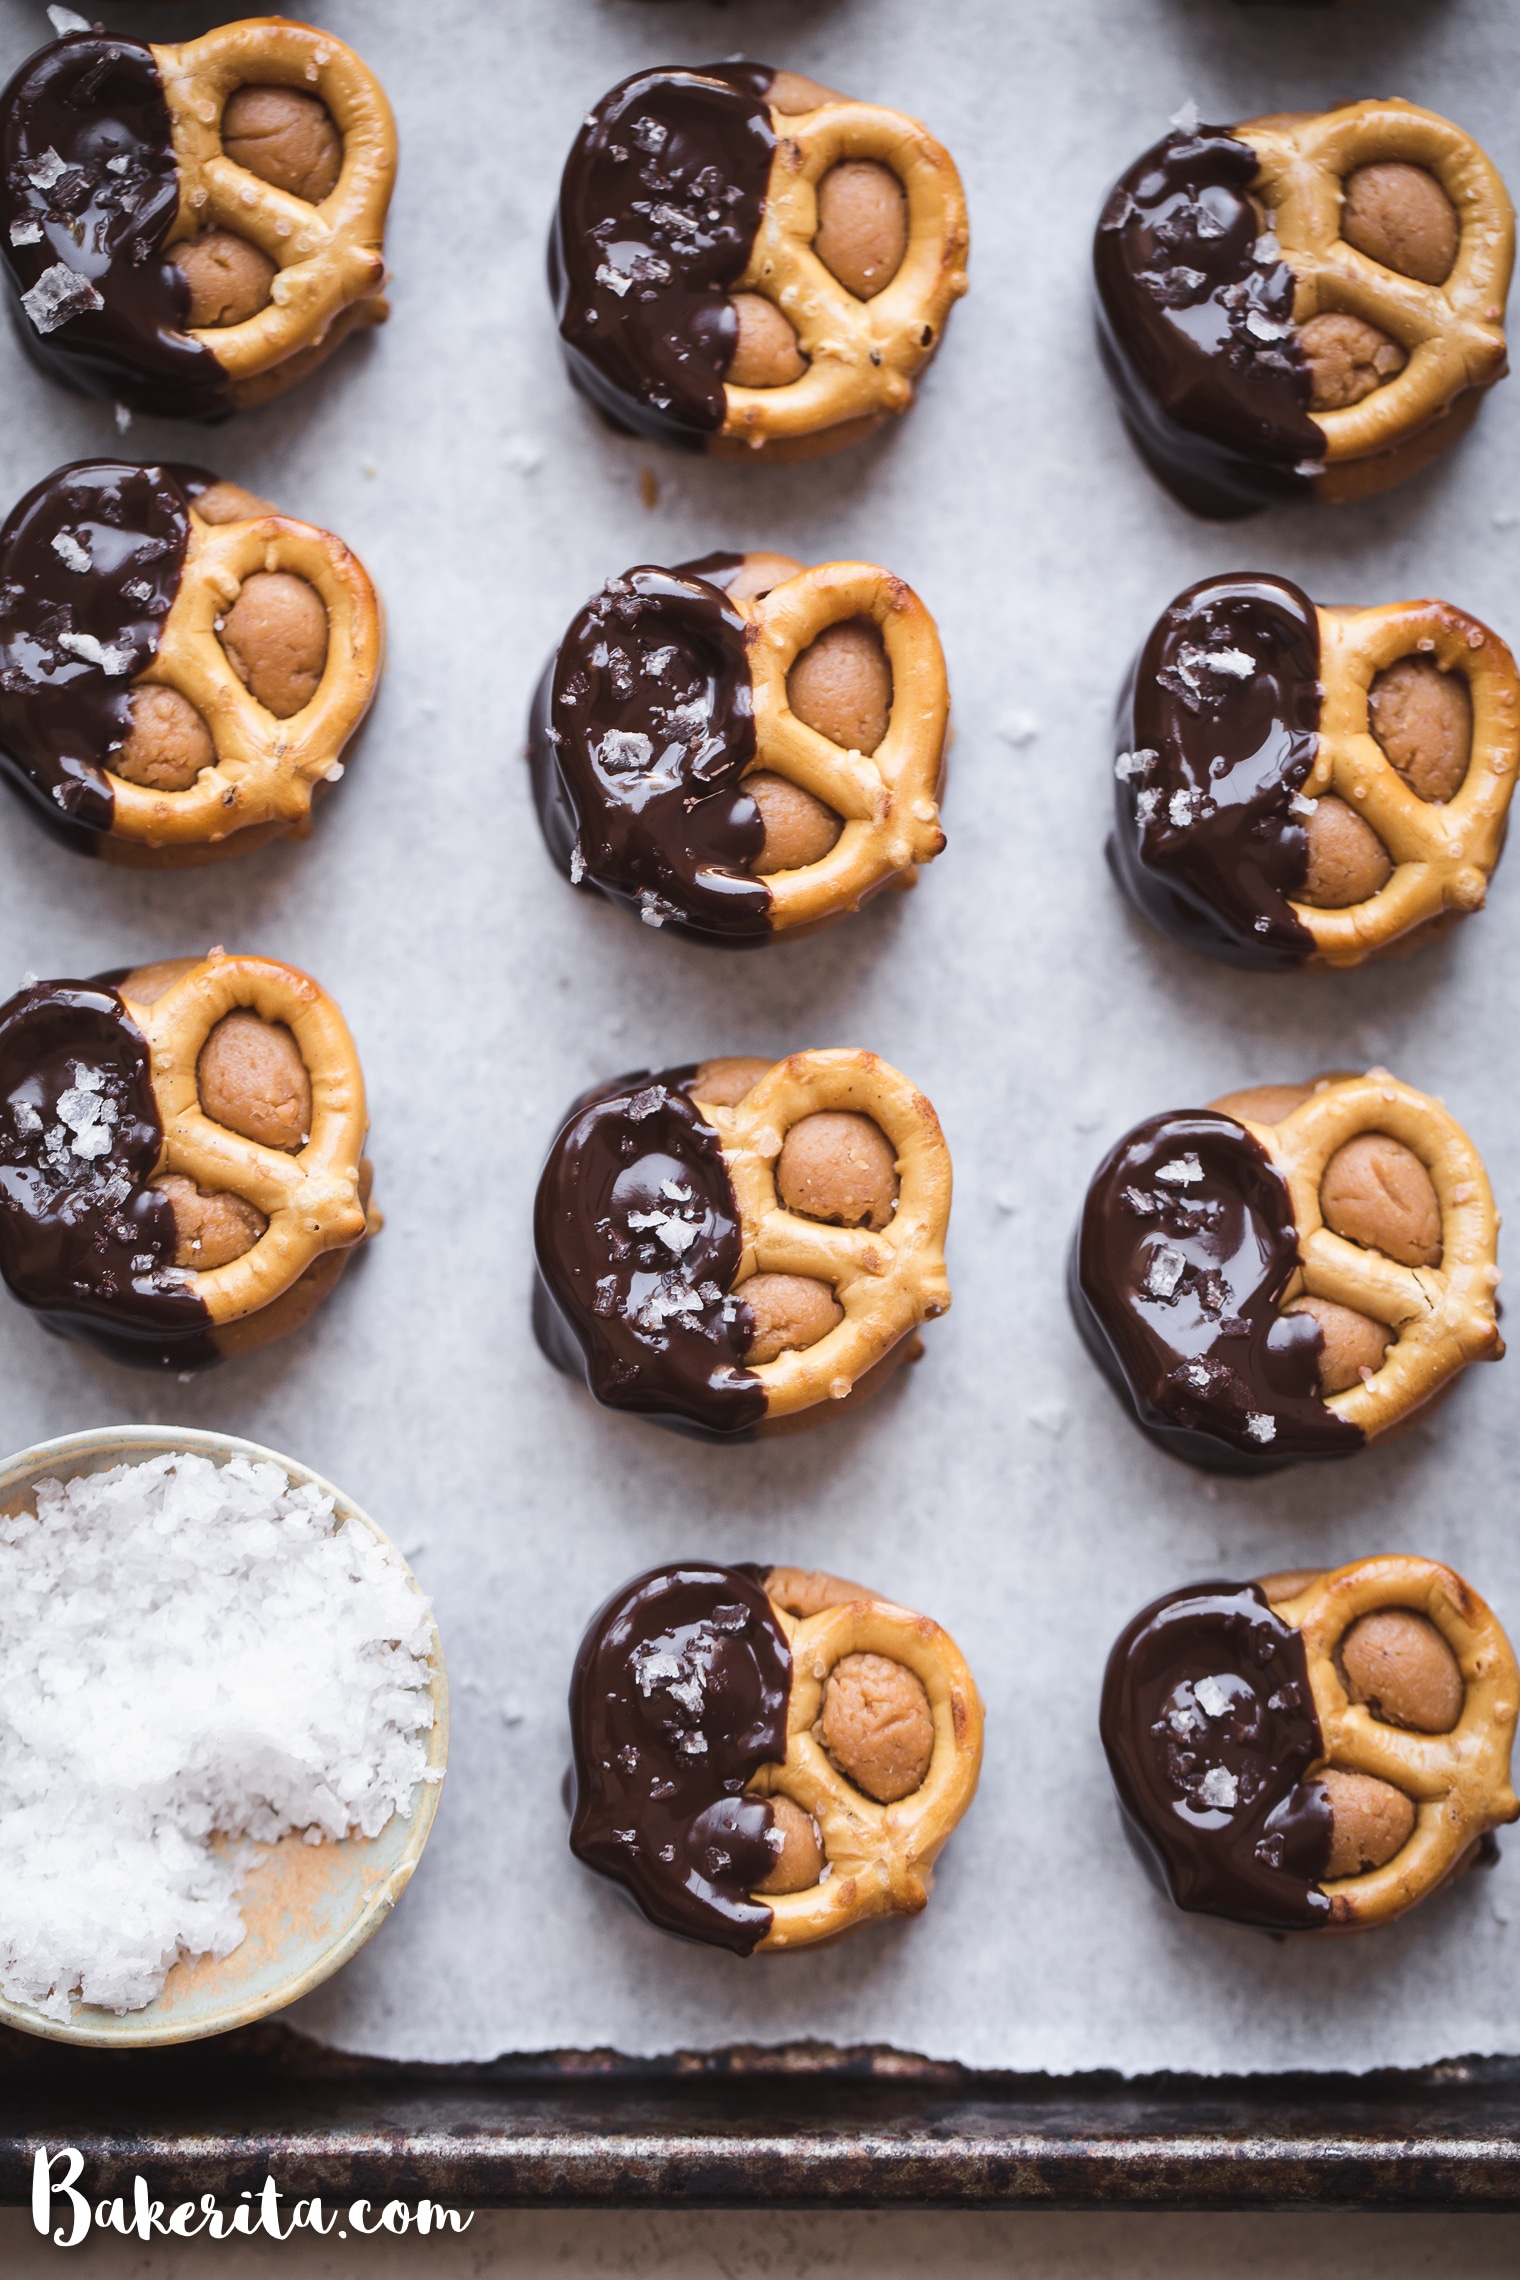 Made with grain-free pretzels and dunk in dark chocolate, these Grain-Free Peanut Butter Pretzel Bites are the perfect easy snack or dessert made with just five ingredients!